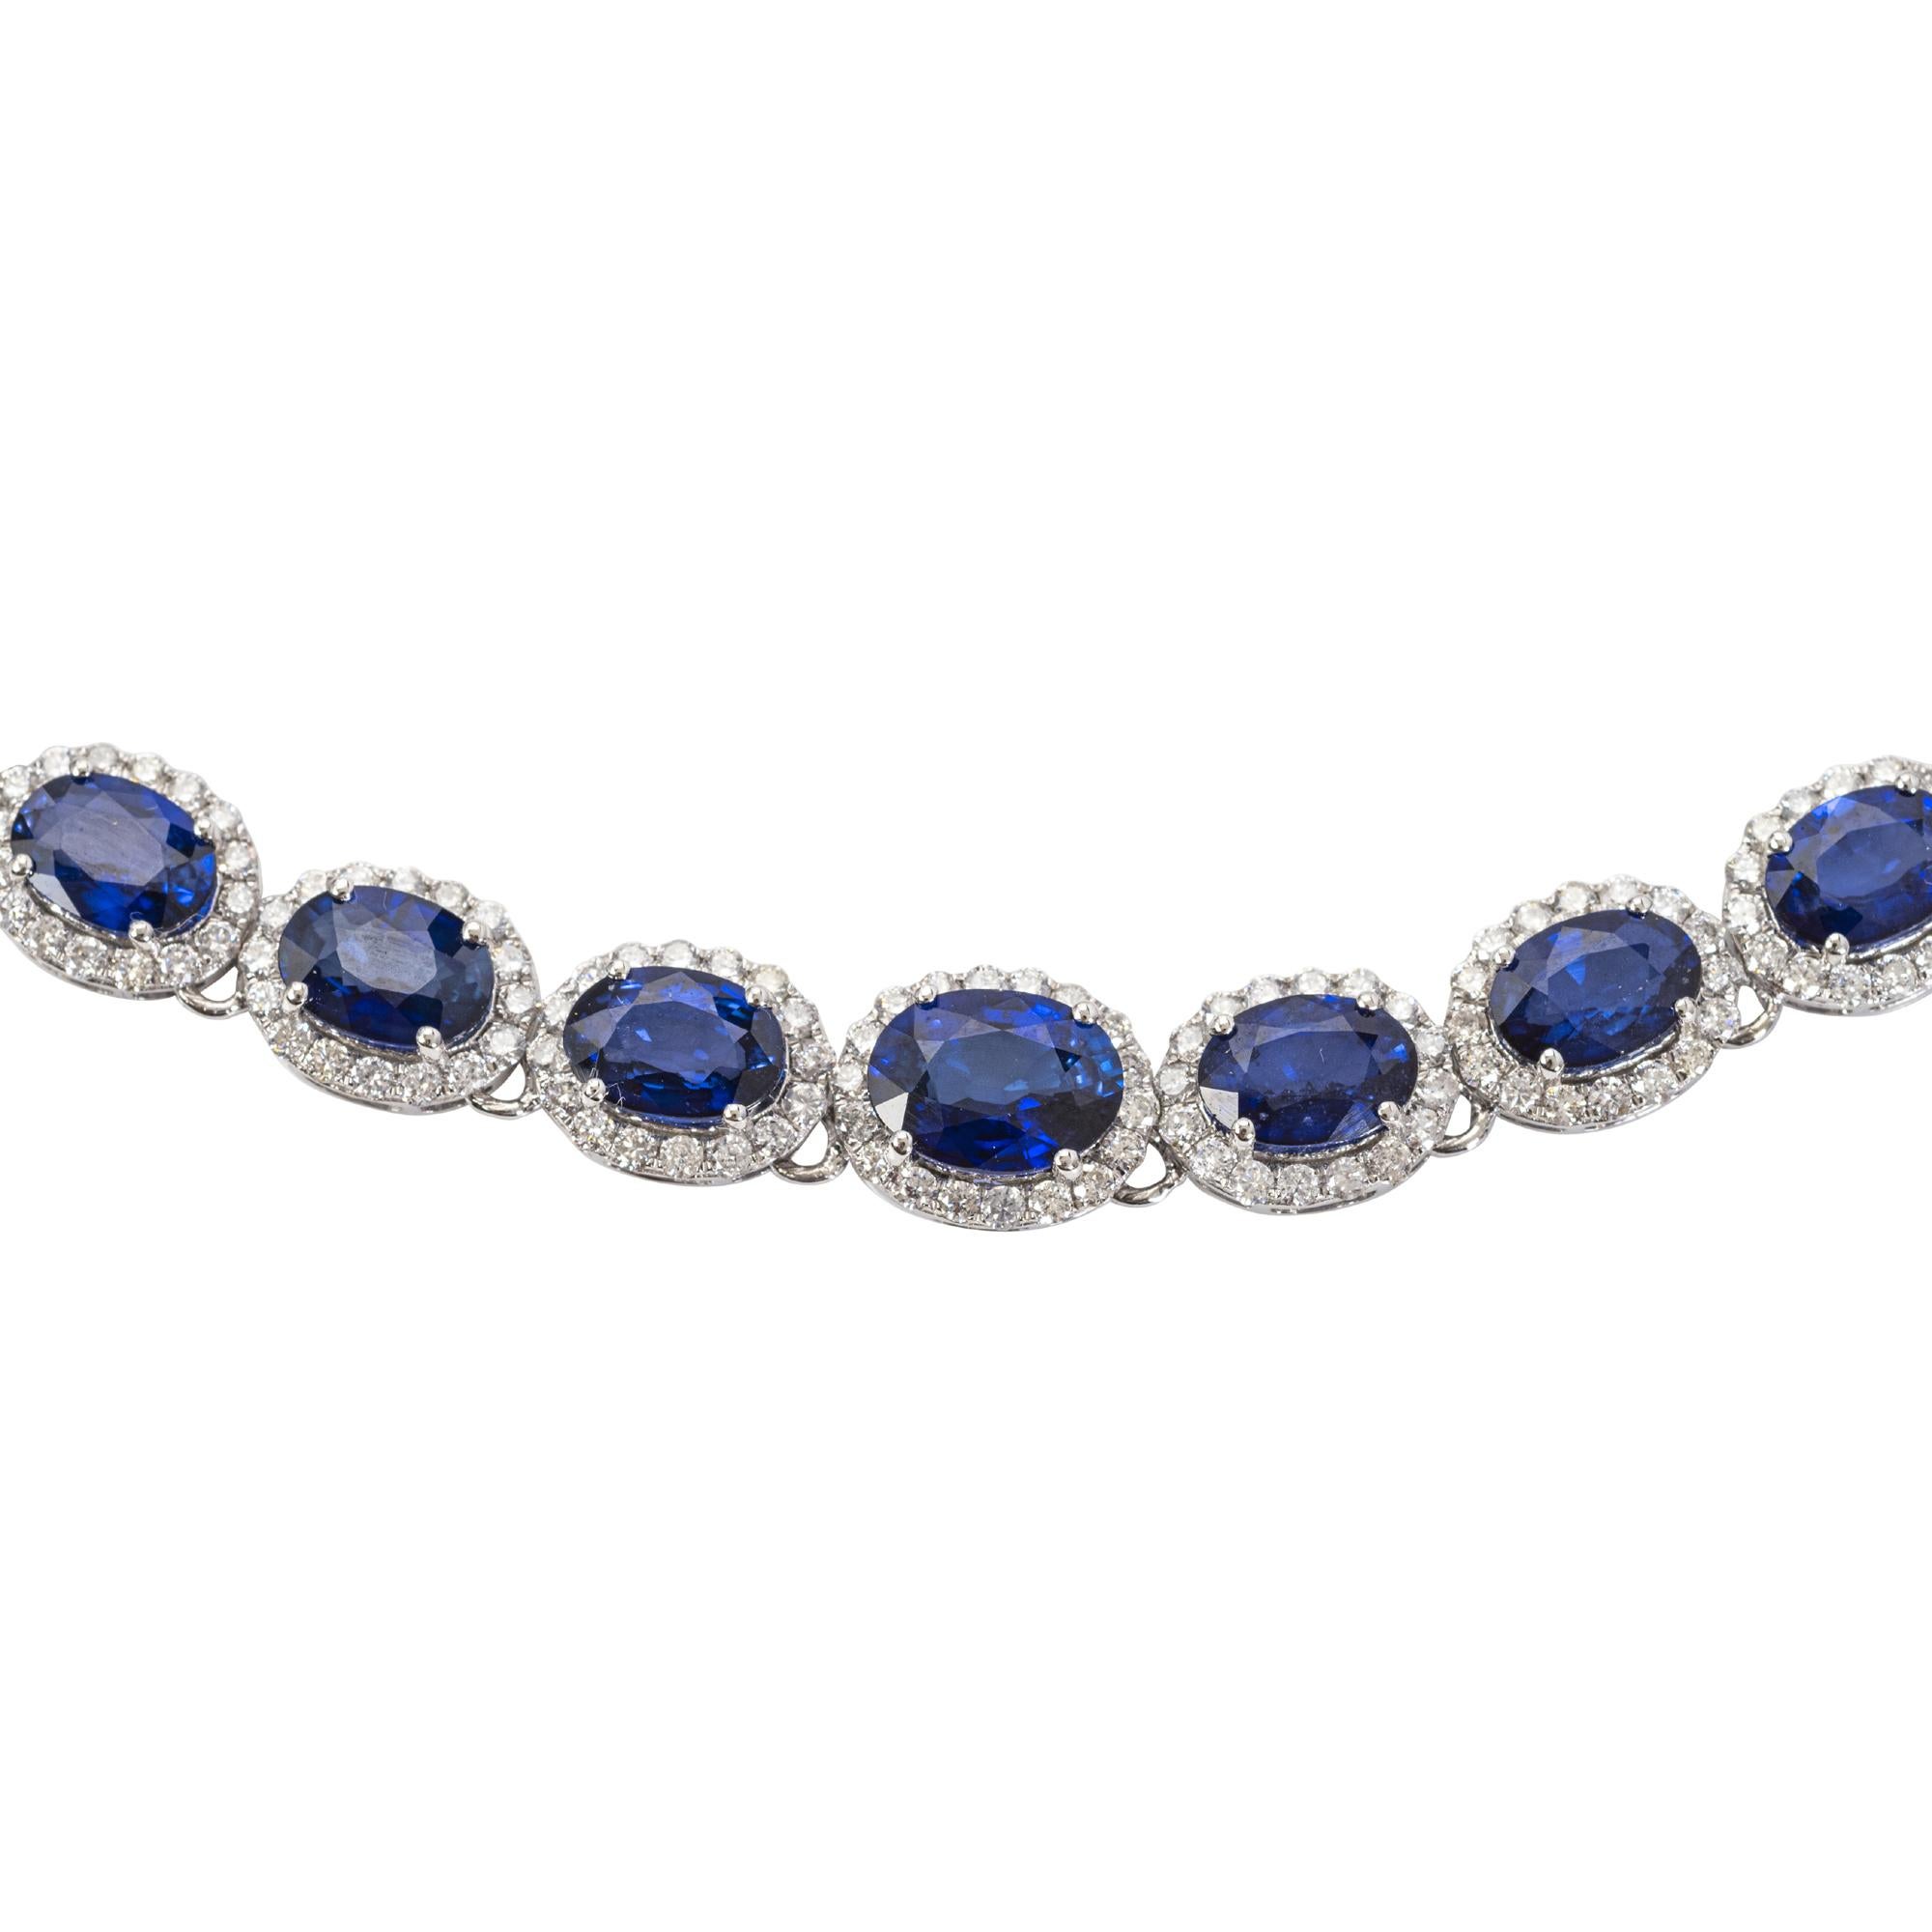 
Sapphire and Diamond Necklace
Designed as a graduated line of fifty-one oval-cut sapphires weighing approximately 32.74 carats in total, each to the surround embellished with brilliant-cut diamonds weighing approximately 7.65 carats in total